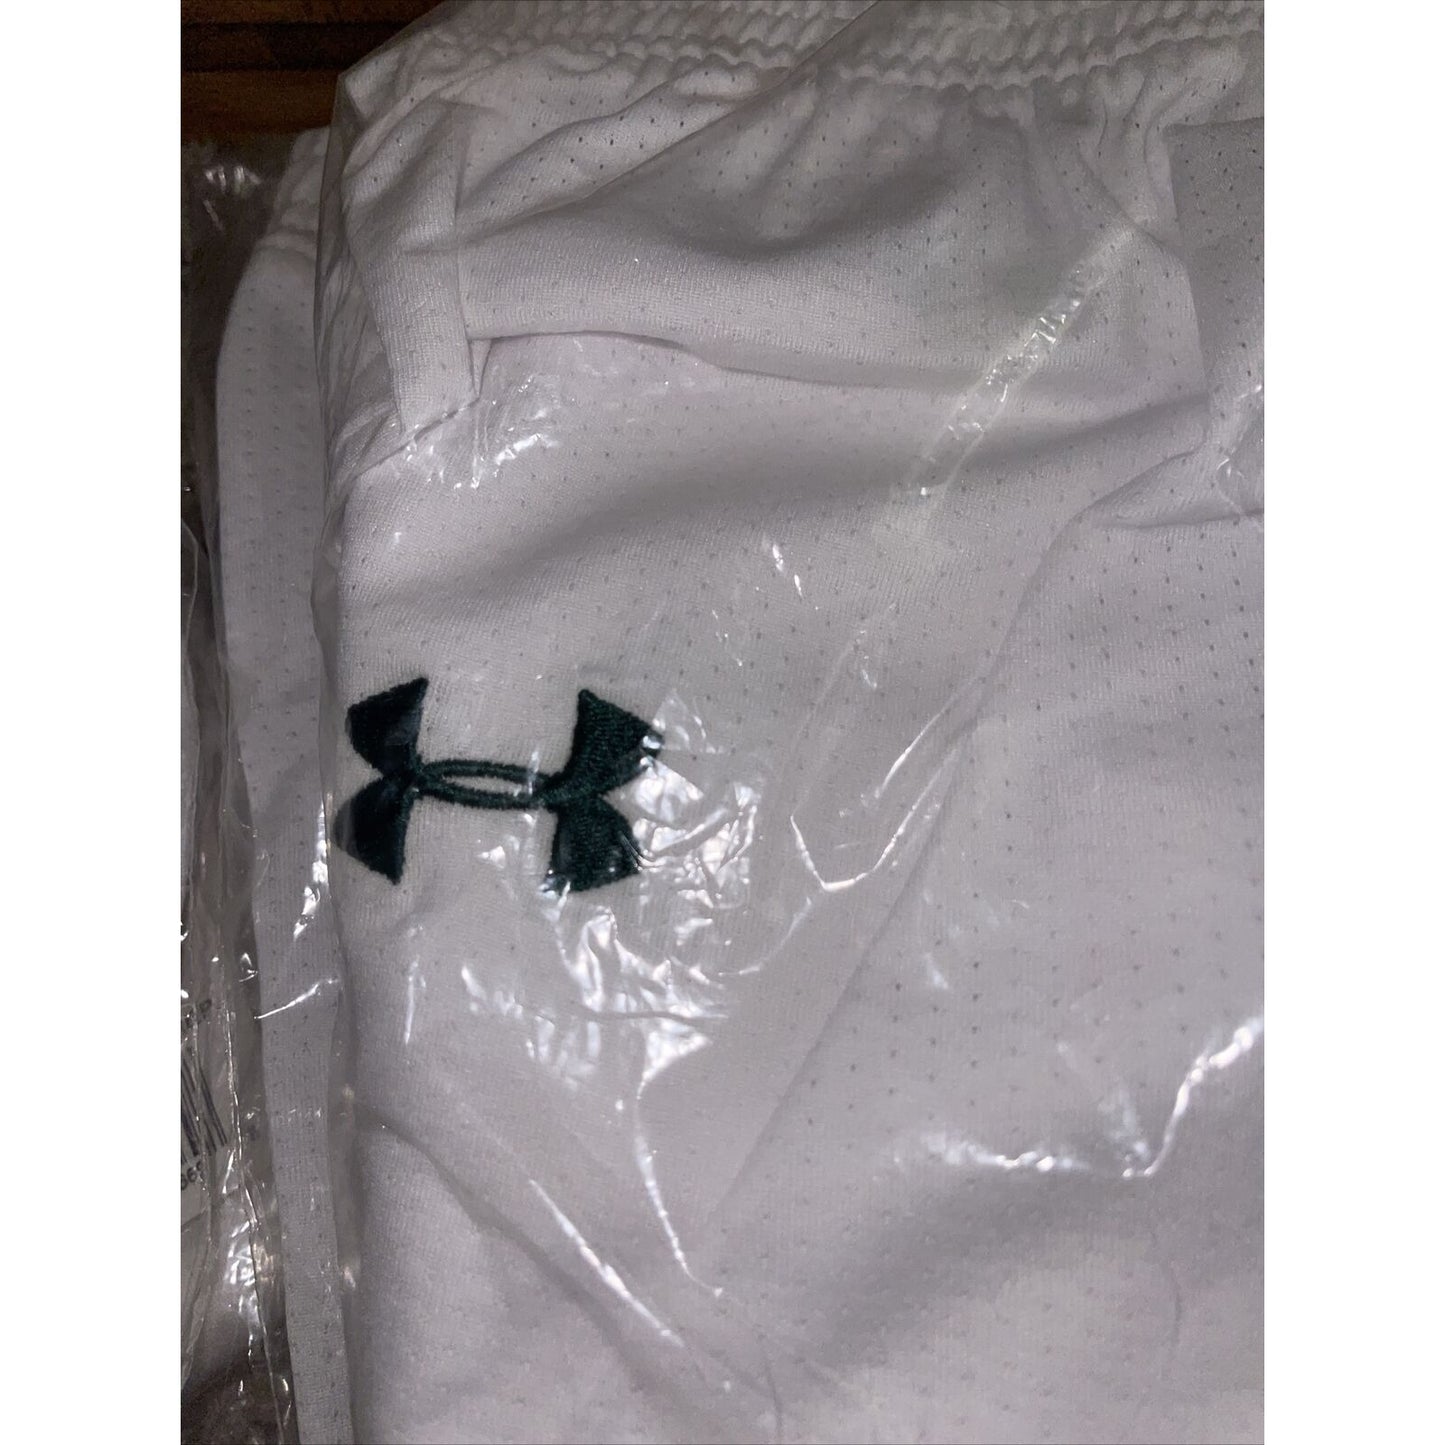 Boy's under armour Youth XL white and Green Lacrosse style shorts no pockets